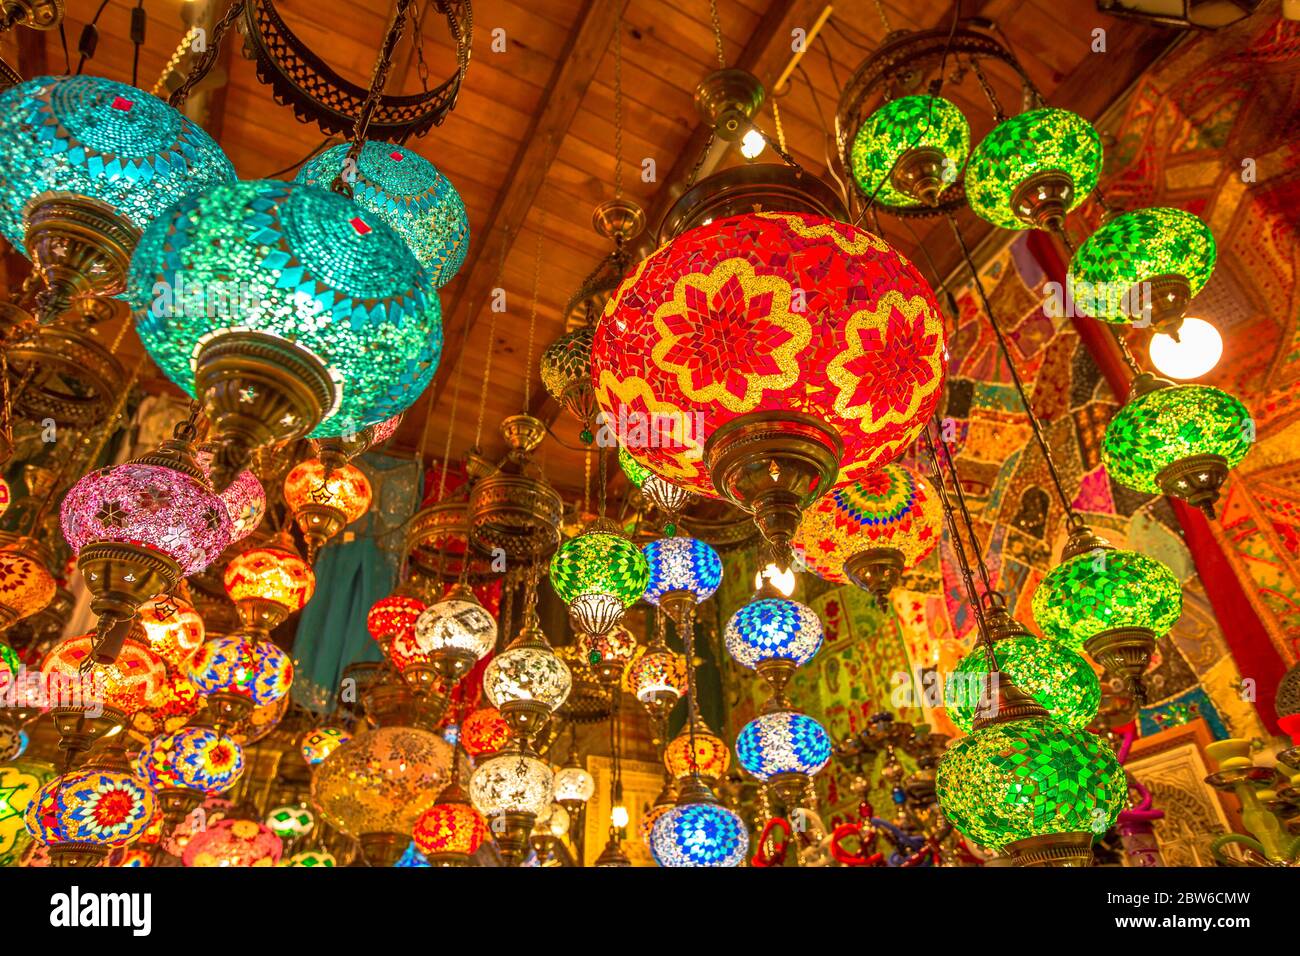 Colorful ceiling chandelier in Arab and Moroccan style. Lanterns lamp hanging down from the ceiling. Stock Photo